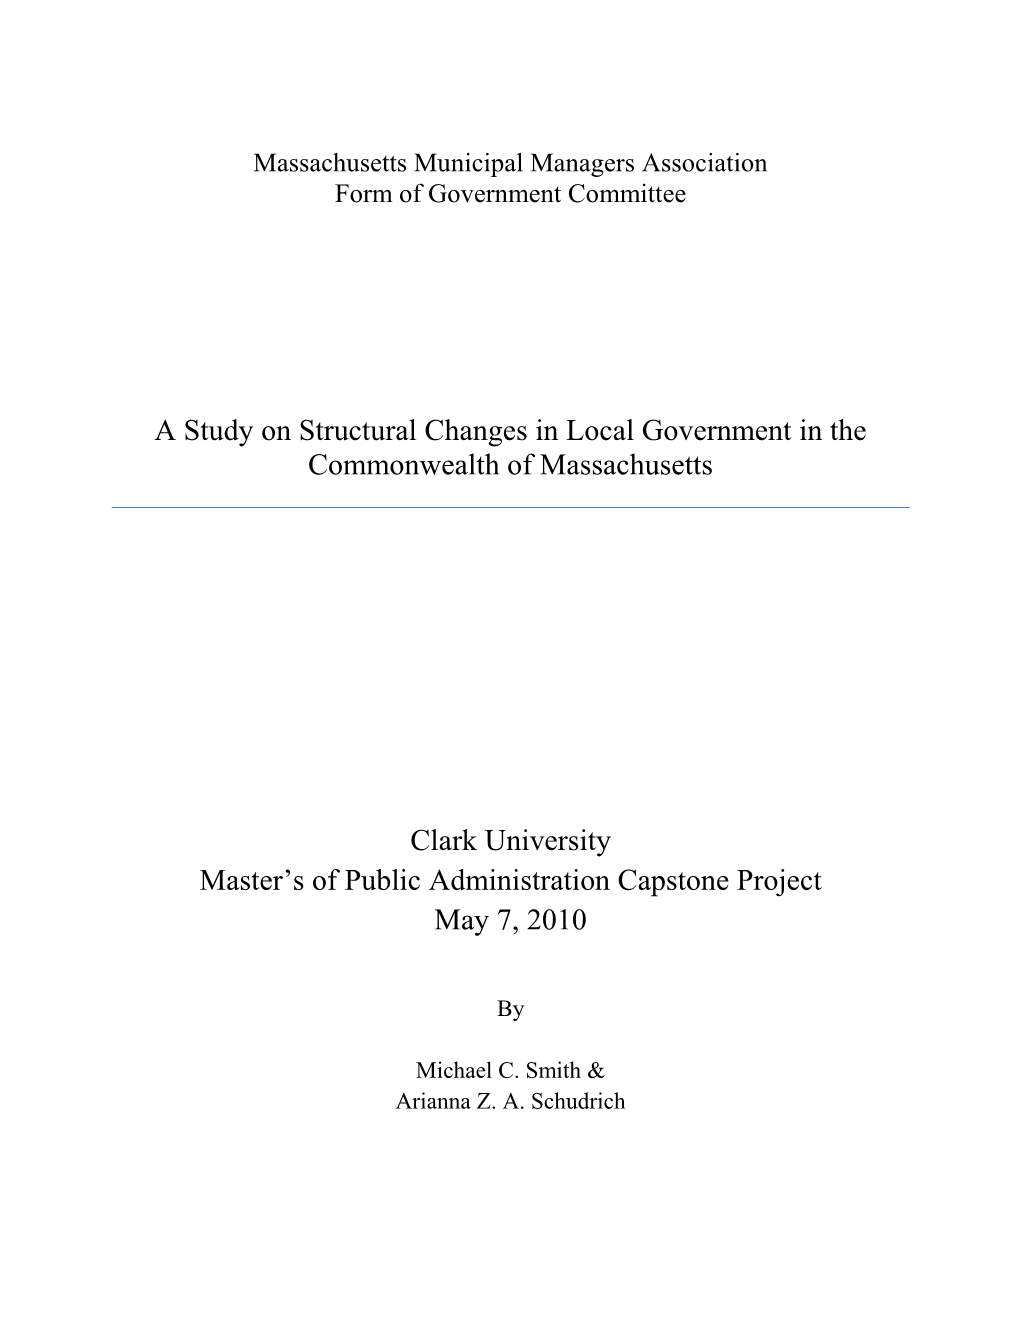 A Study on Structural Changes in Local Government in the Commonwealth of Massachusetts